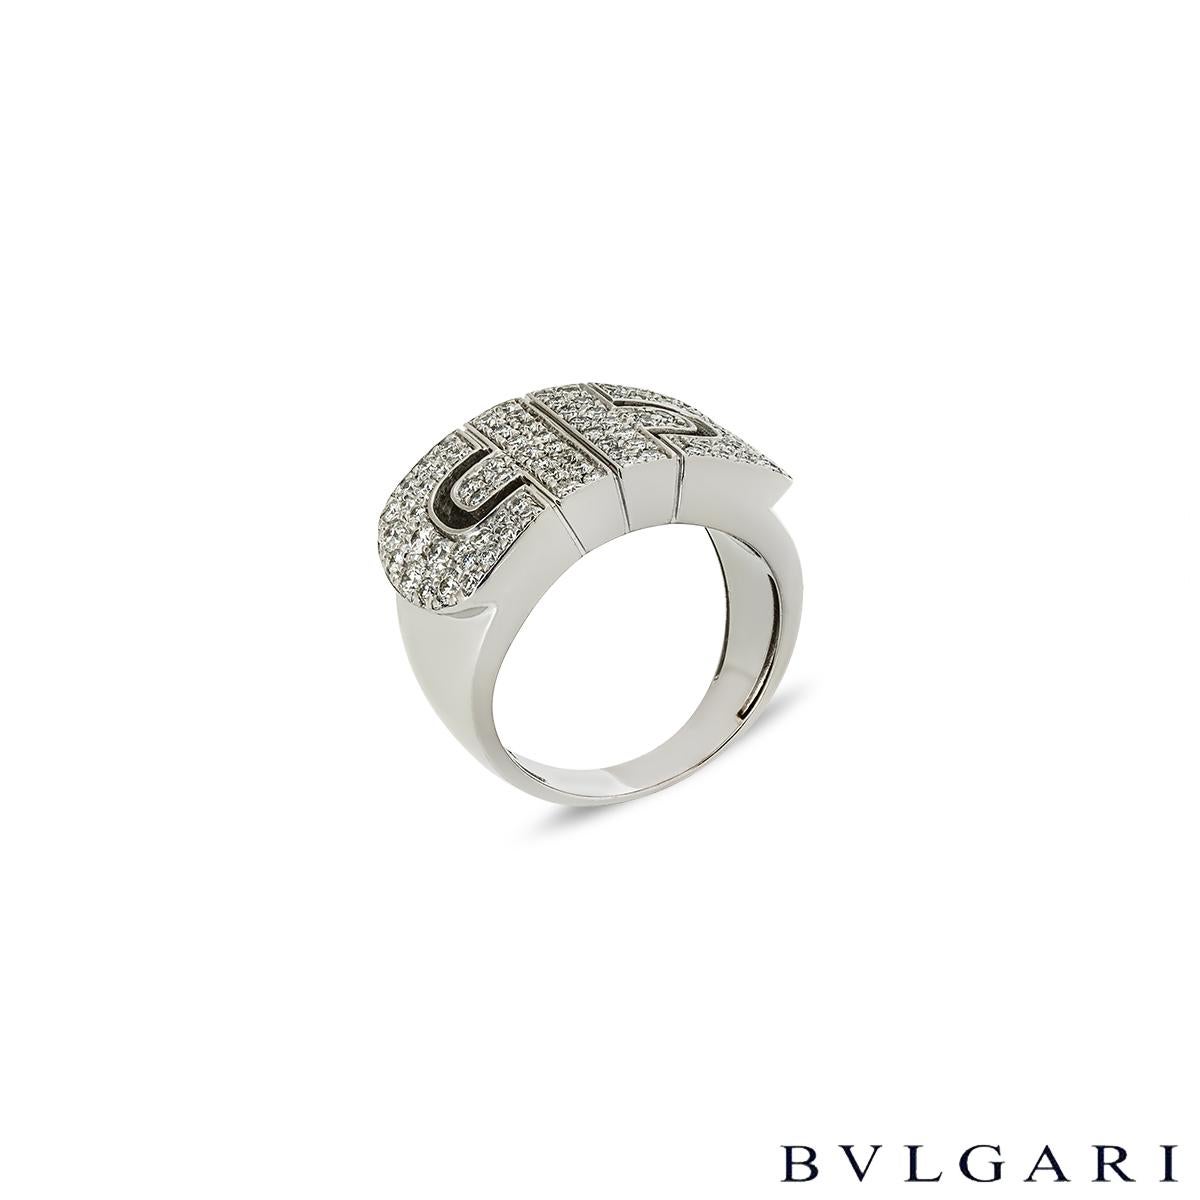 A lovely 18k white gold Parentesi Revolution ring by Bvlgari. The ring comprises of the Parentesi motif with diamonds in a pave setting. The ring is set with 88 round brilliant cut diamonds totalling approximately 1.14ct, G colour and VS clarity.